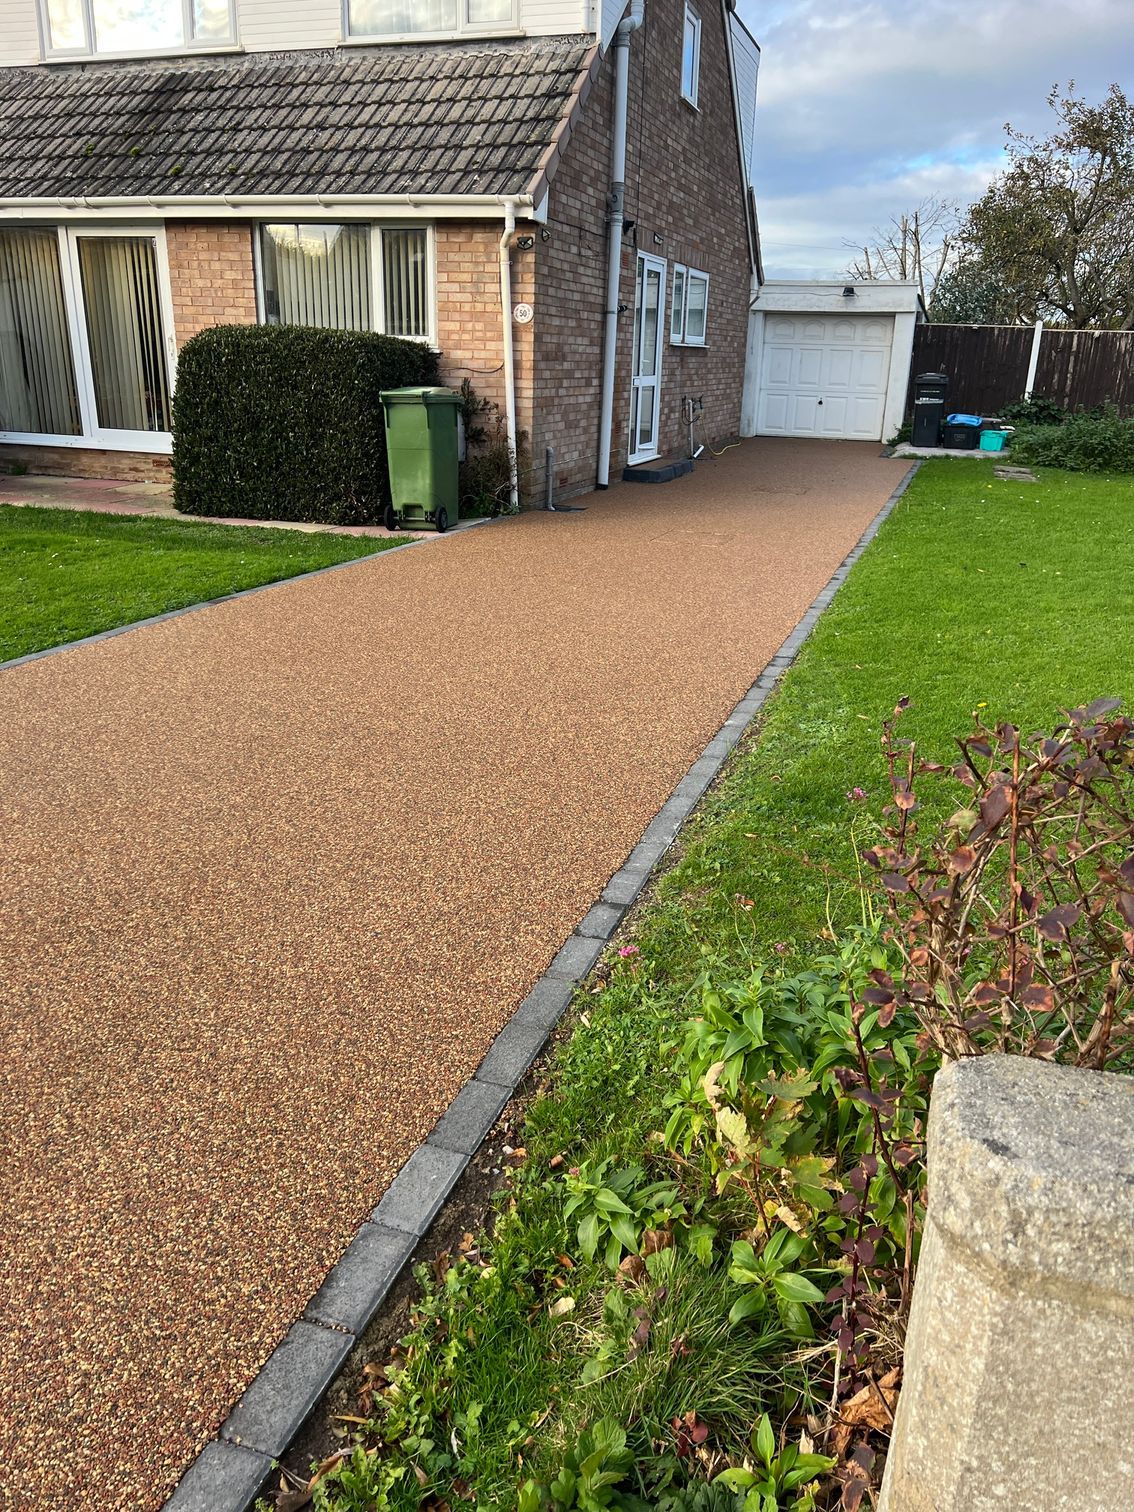 Resin driveway between 2 patches of grass, leading up to a white garage